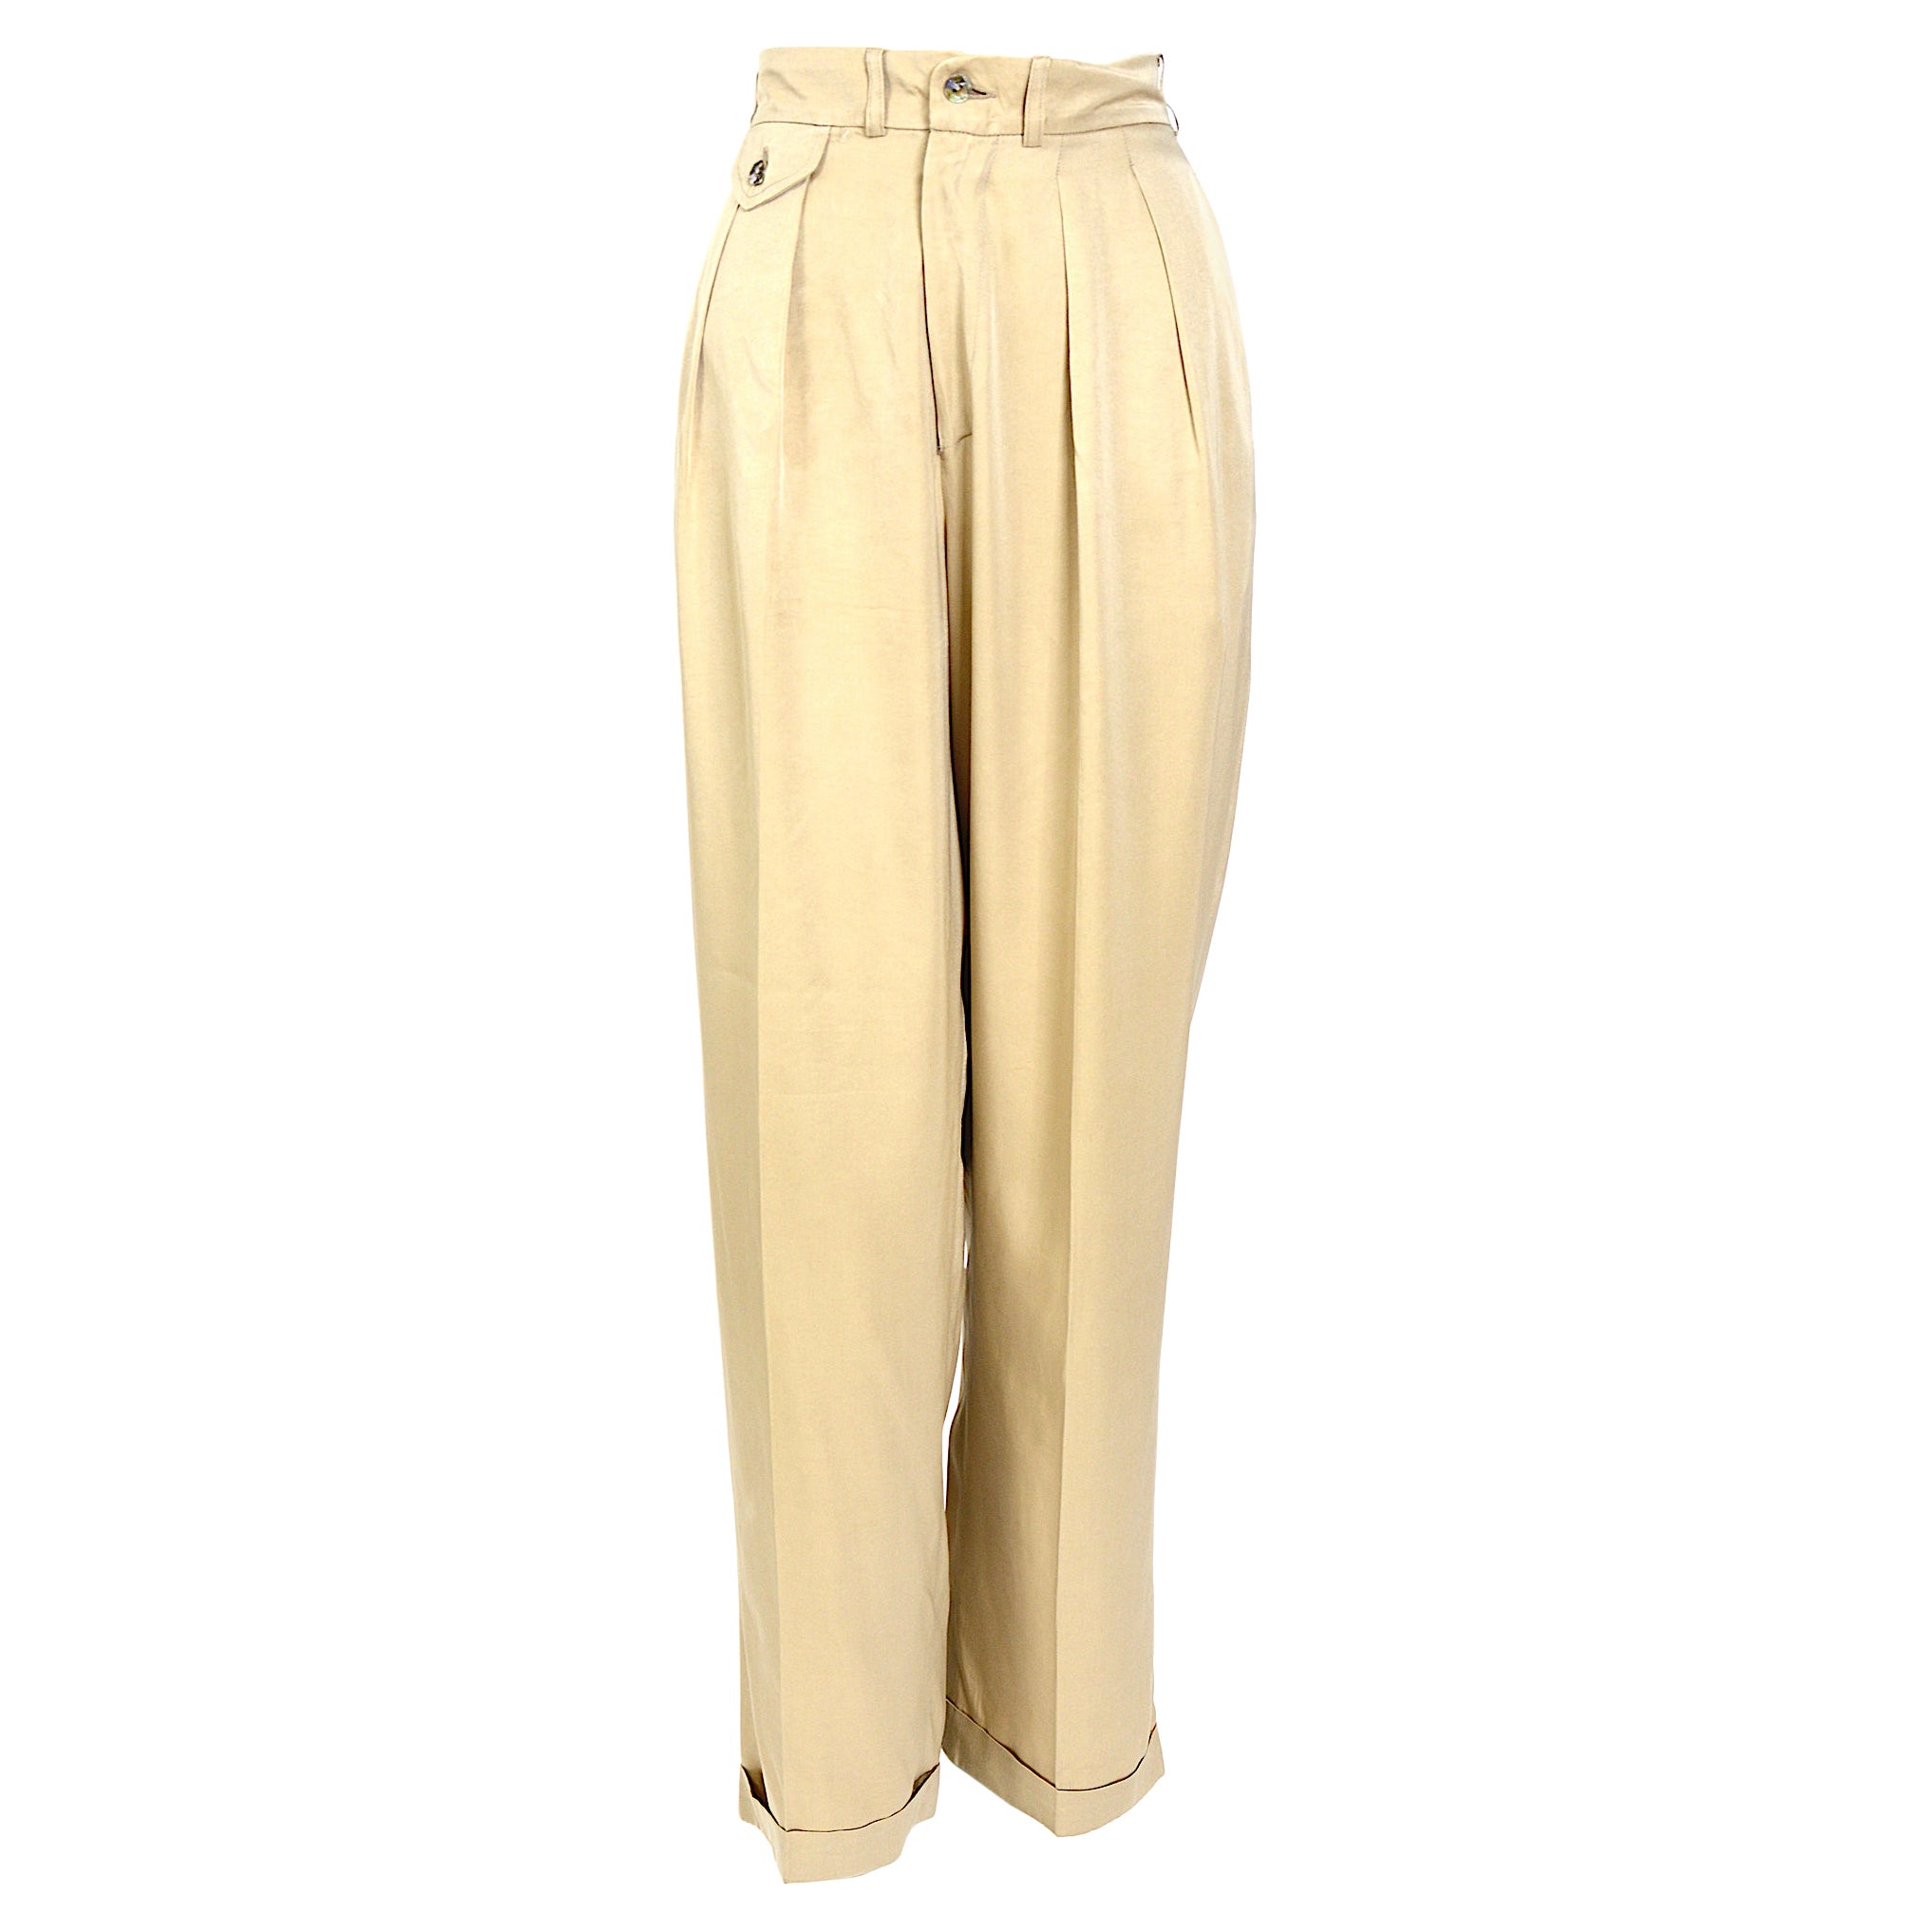 Rifat Ozbek vintage 1990s front pleated elegant silk mix trousers   For Sale